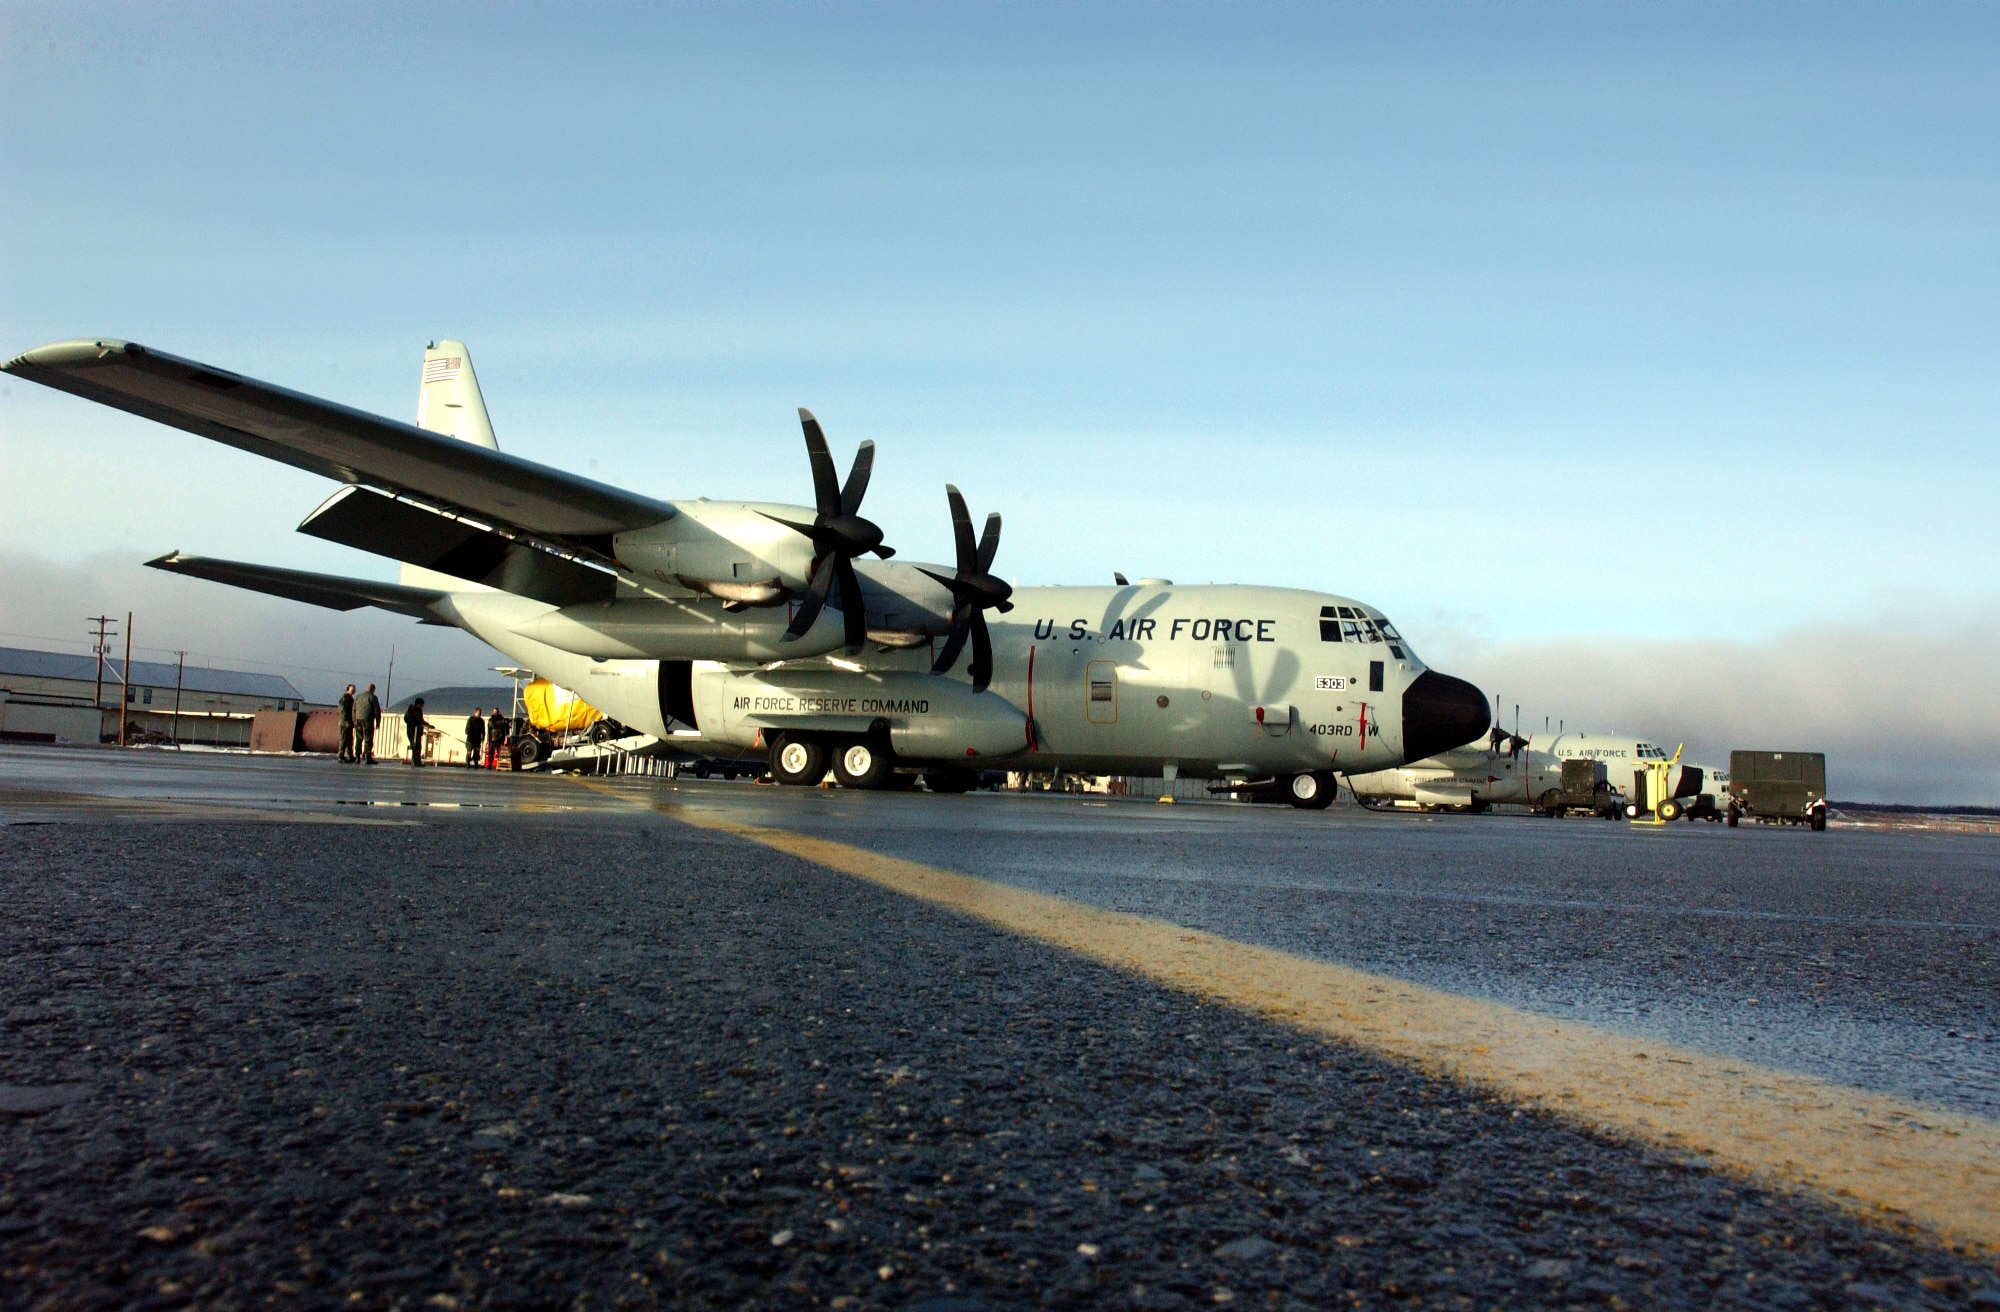 A WC-130J on the apron at Elmendorf Air Force Base, Alaska, in 2003. The J-model allows aircrews to fly higher improving the winter storm forecast models. (U.S. Air Force photo)